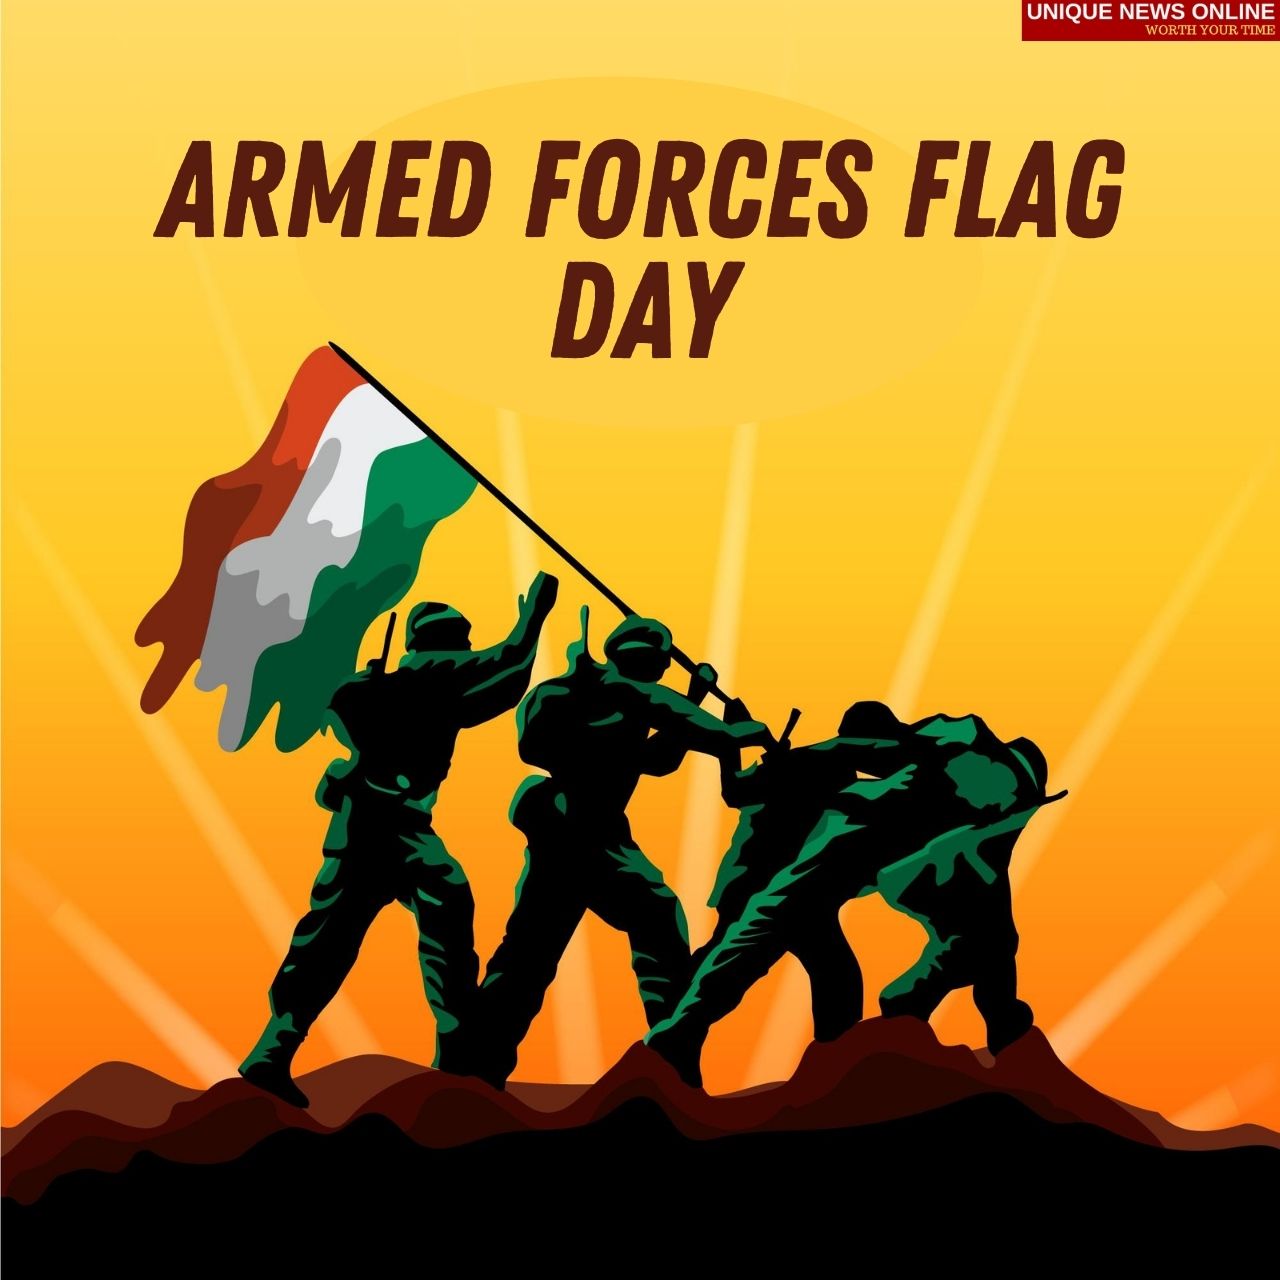 Indian Armed Forces Flag Day 2021: History, Significance, Activities, Fund Donation, and More